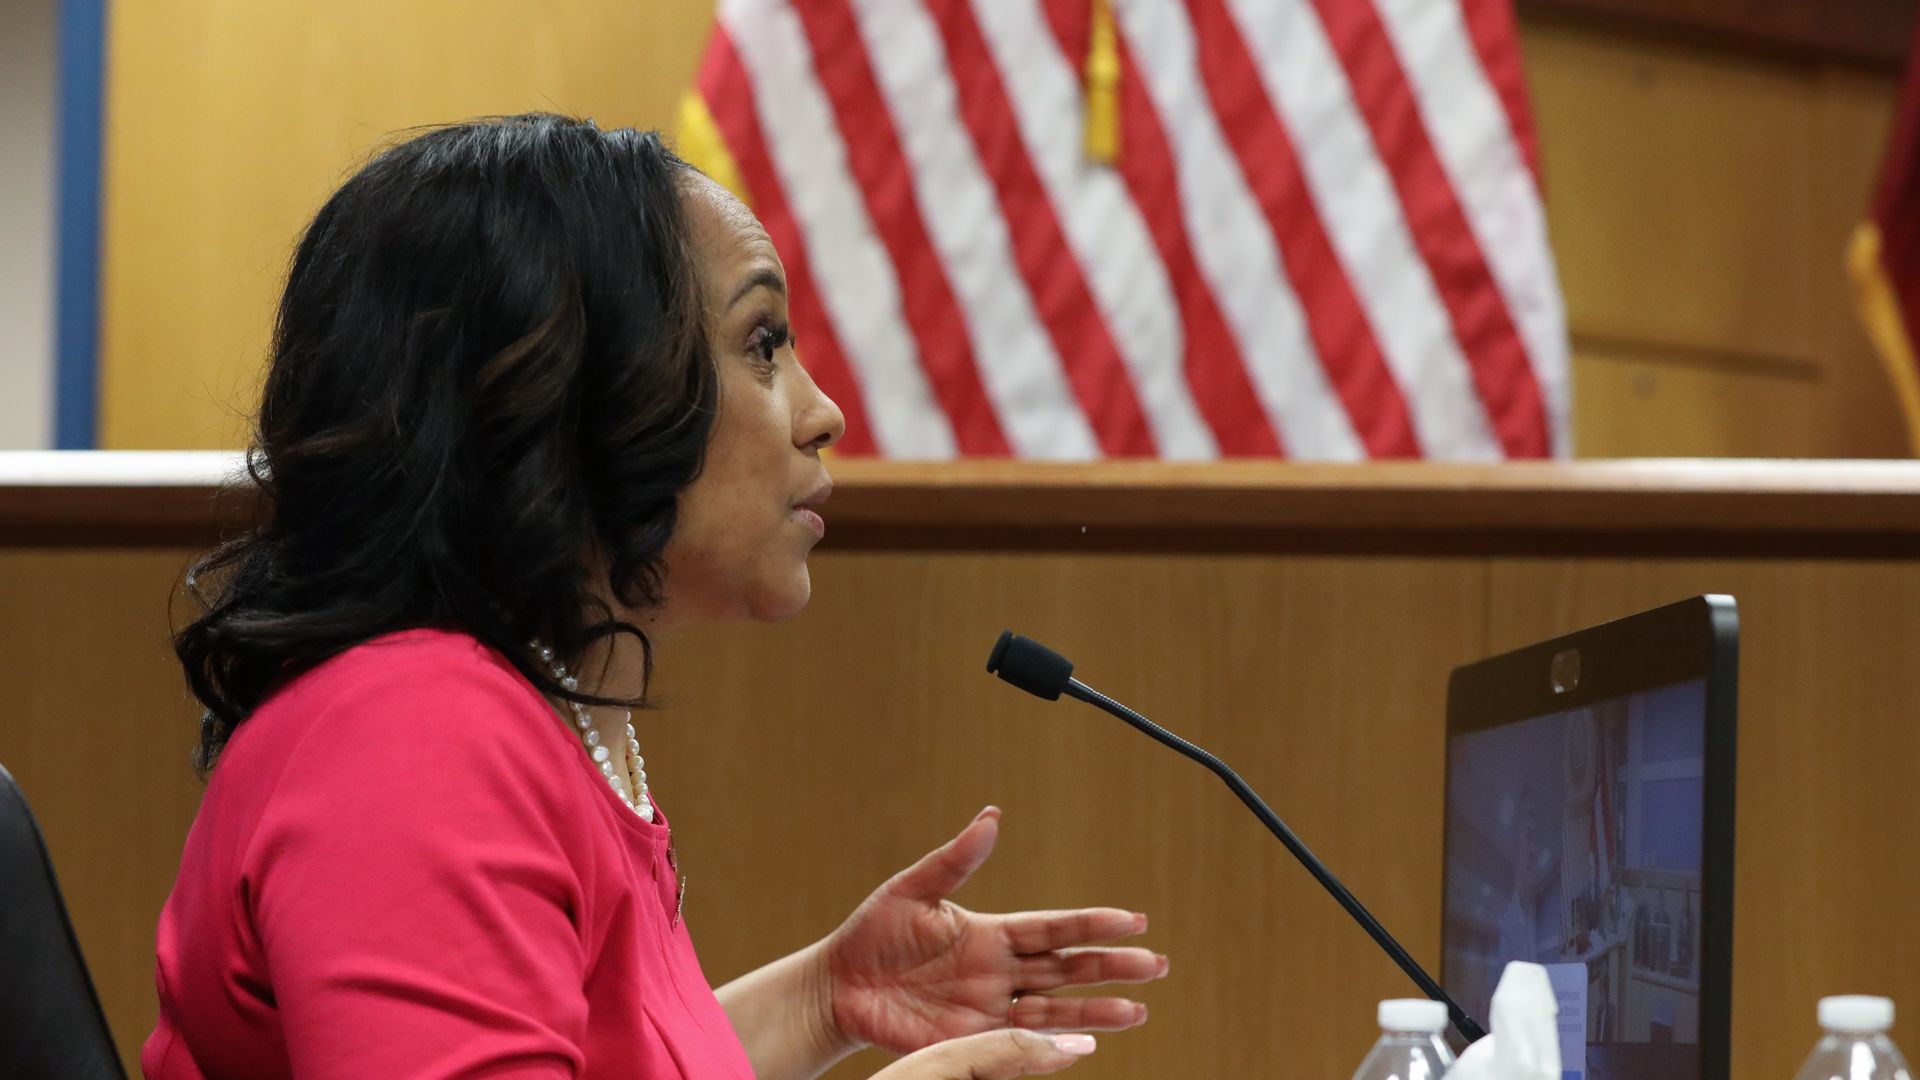 Fulton County District Attorney Fani Willis testifies during a hearing in the case of the State of Georgia v. Donald John Trump at the Fulton County Courthouse on February 15, 2024 in Atlanta, Georgia.